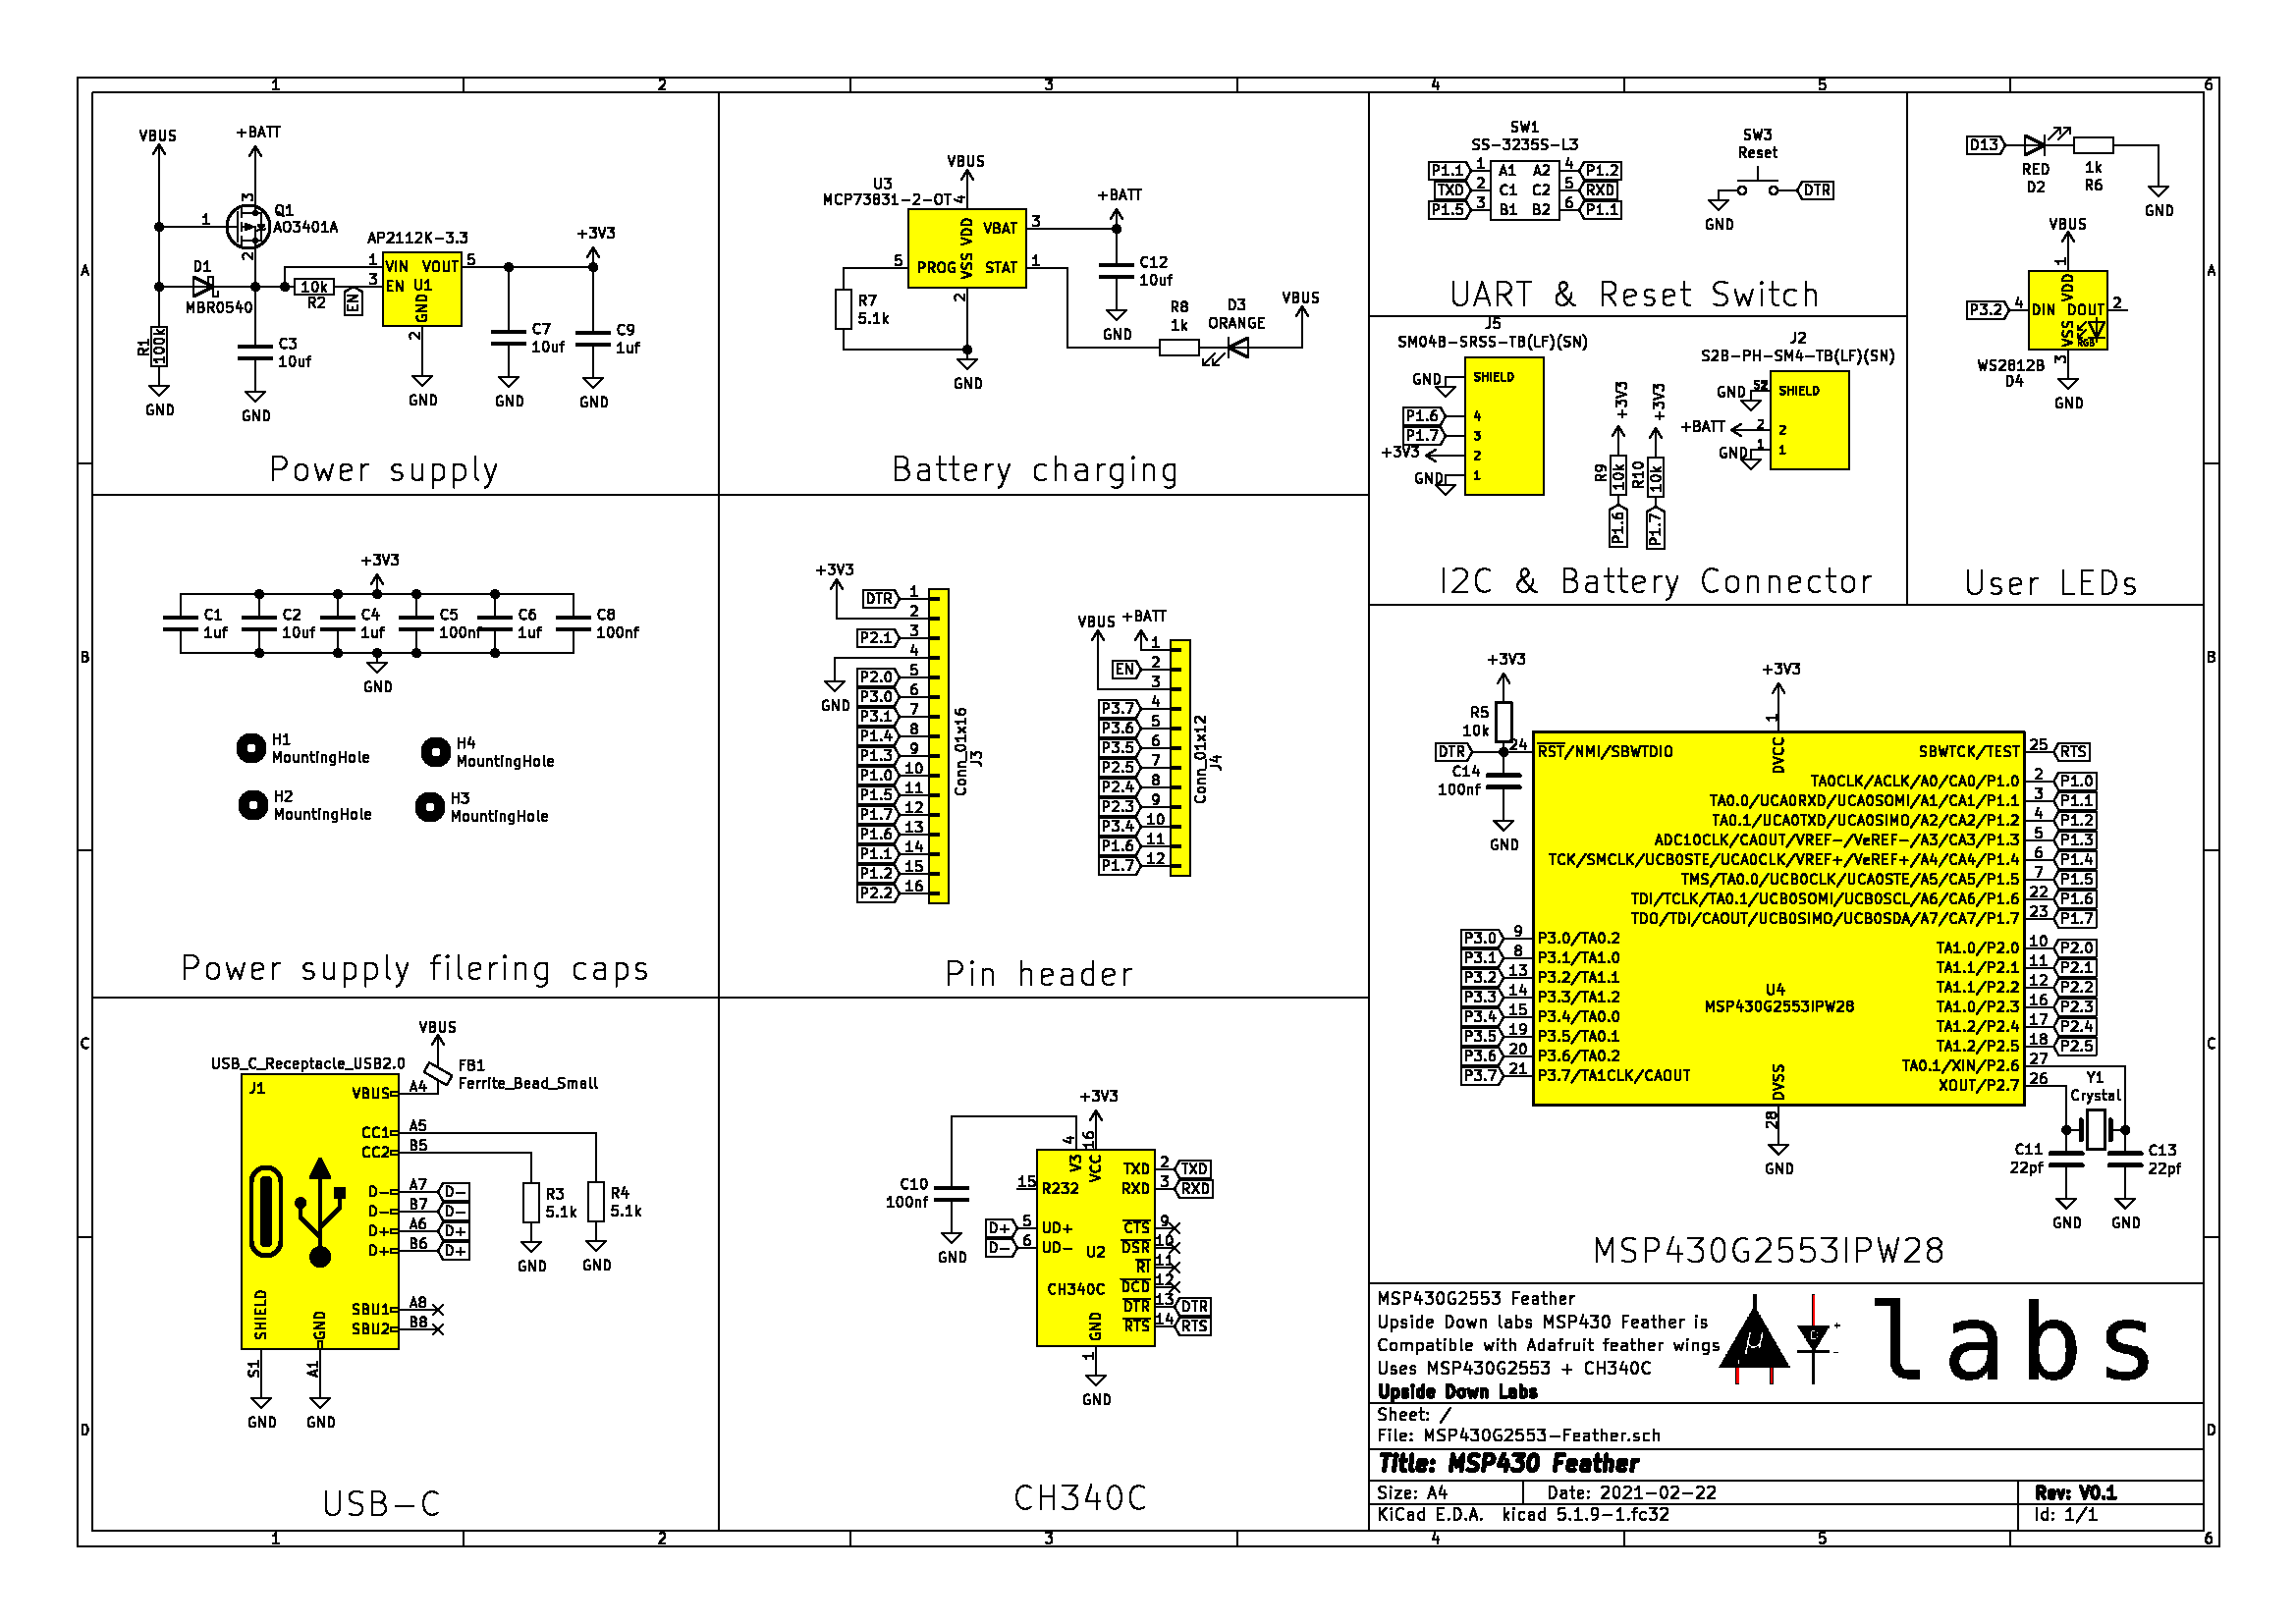 Upside Down Labs MSP430G2553 Feather schematic